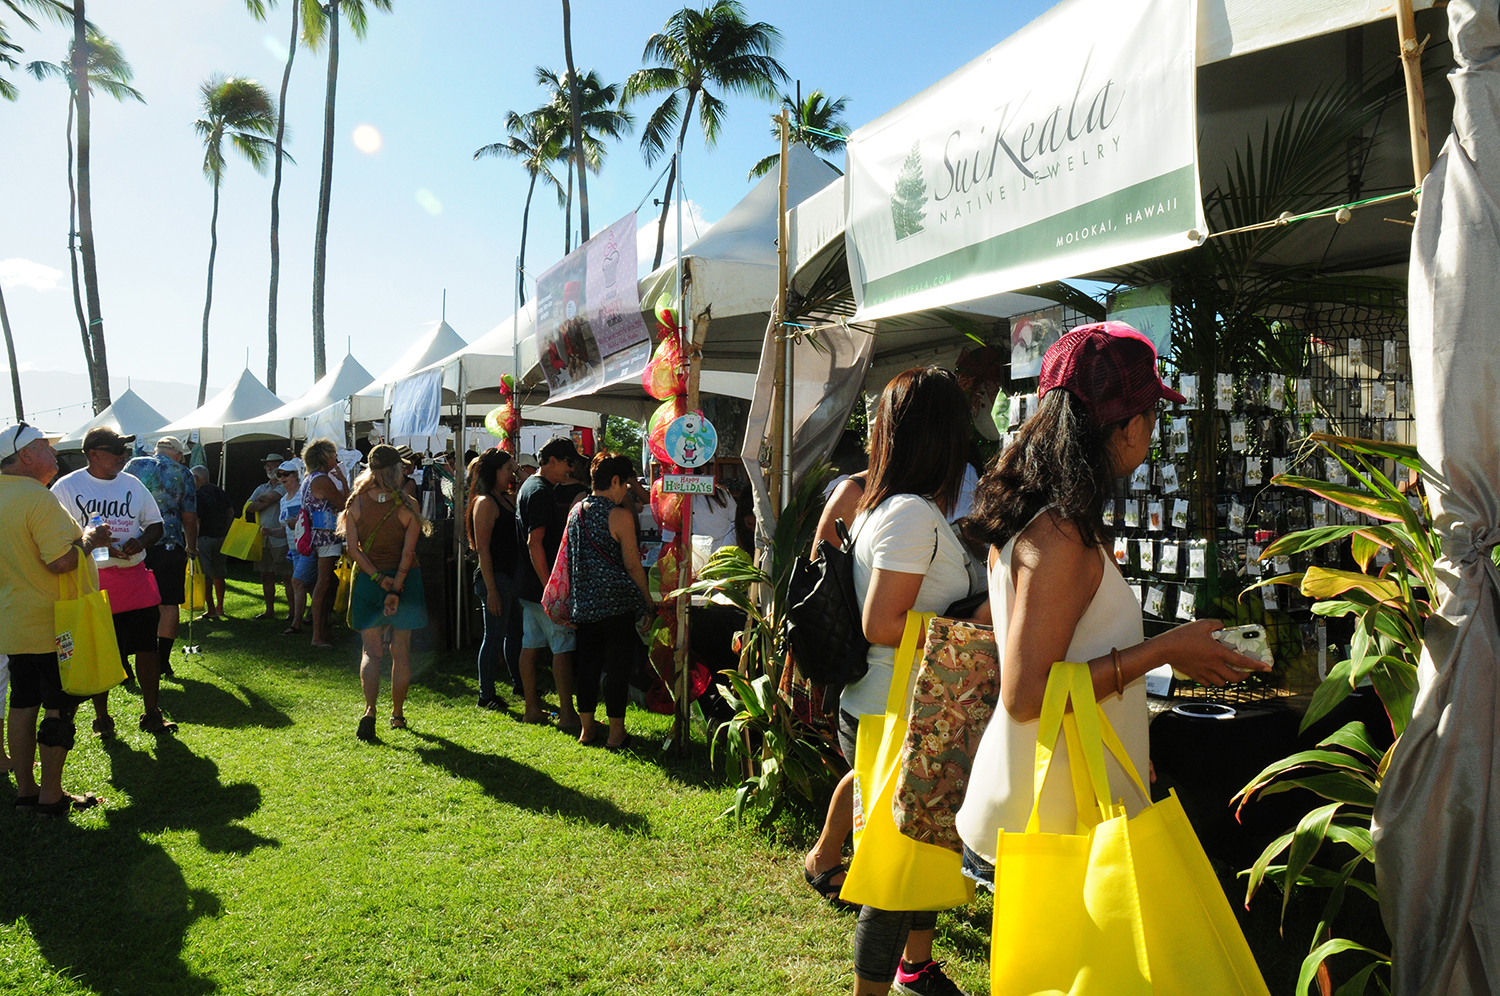 The 2019 Hawaiian Airlines Made in Maui County Festival, set for Nov. 1 & 2 at the Maui Arts & Cultural Center in Kahului, will feature over 140 vendors showcasing hundreds of locally made products.